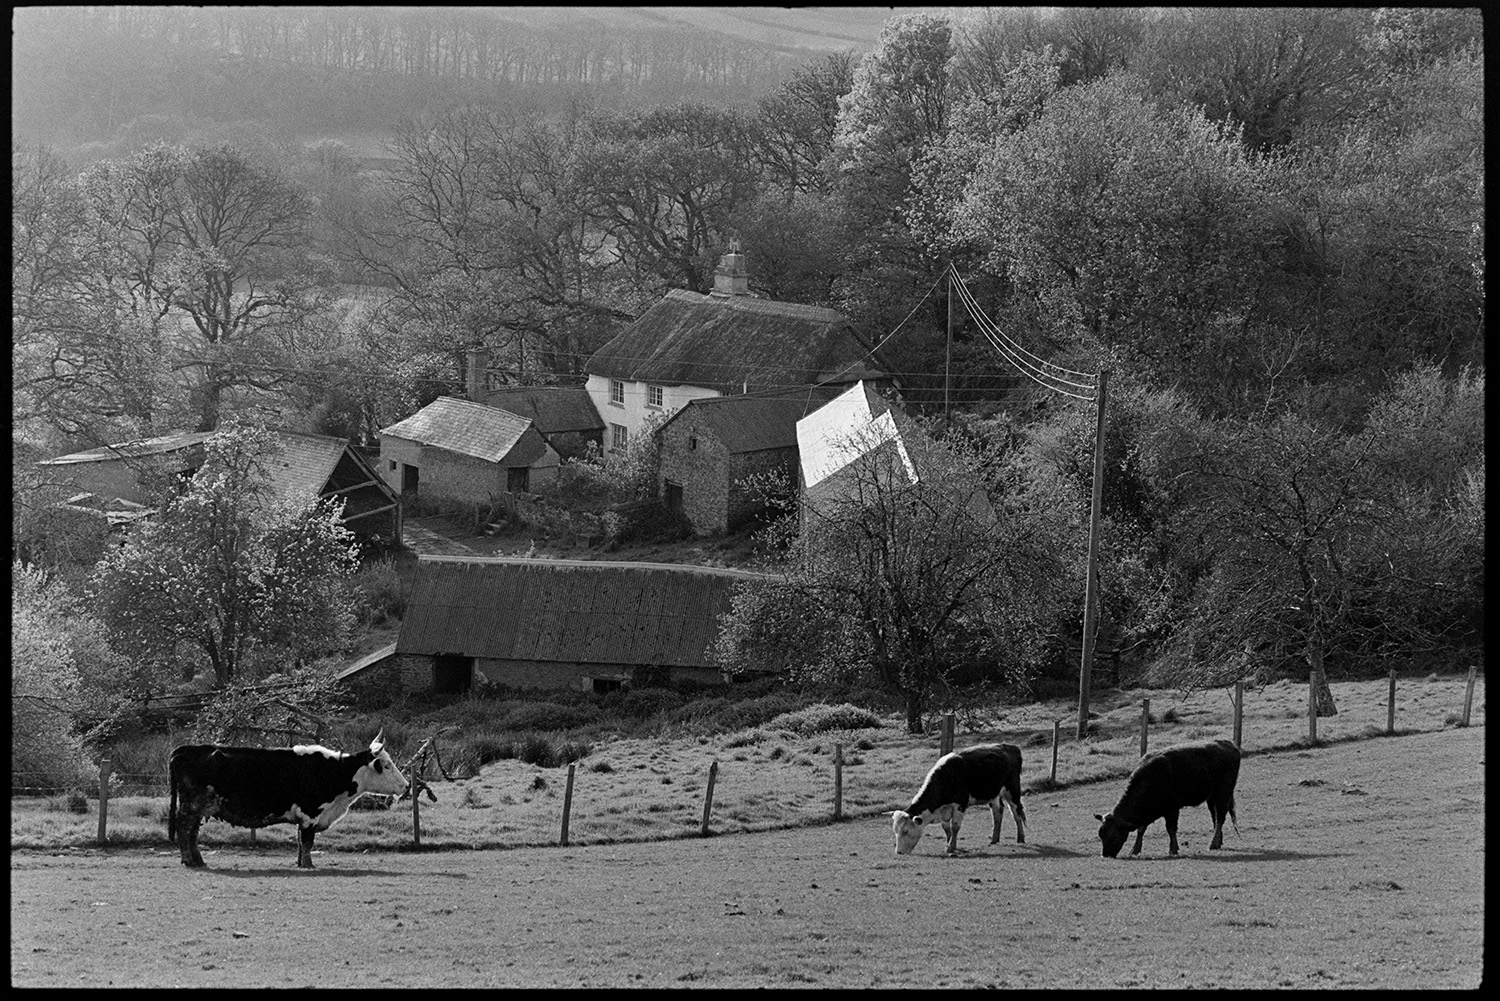 Cattle grazing in front of thatched farmhouse amongst trees. 
[Cattle grazing in a field in front of a thatched farmhouse and barns at Ashwell, Dolton. The farmyard is surrounded by trees.]